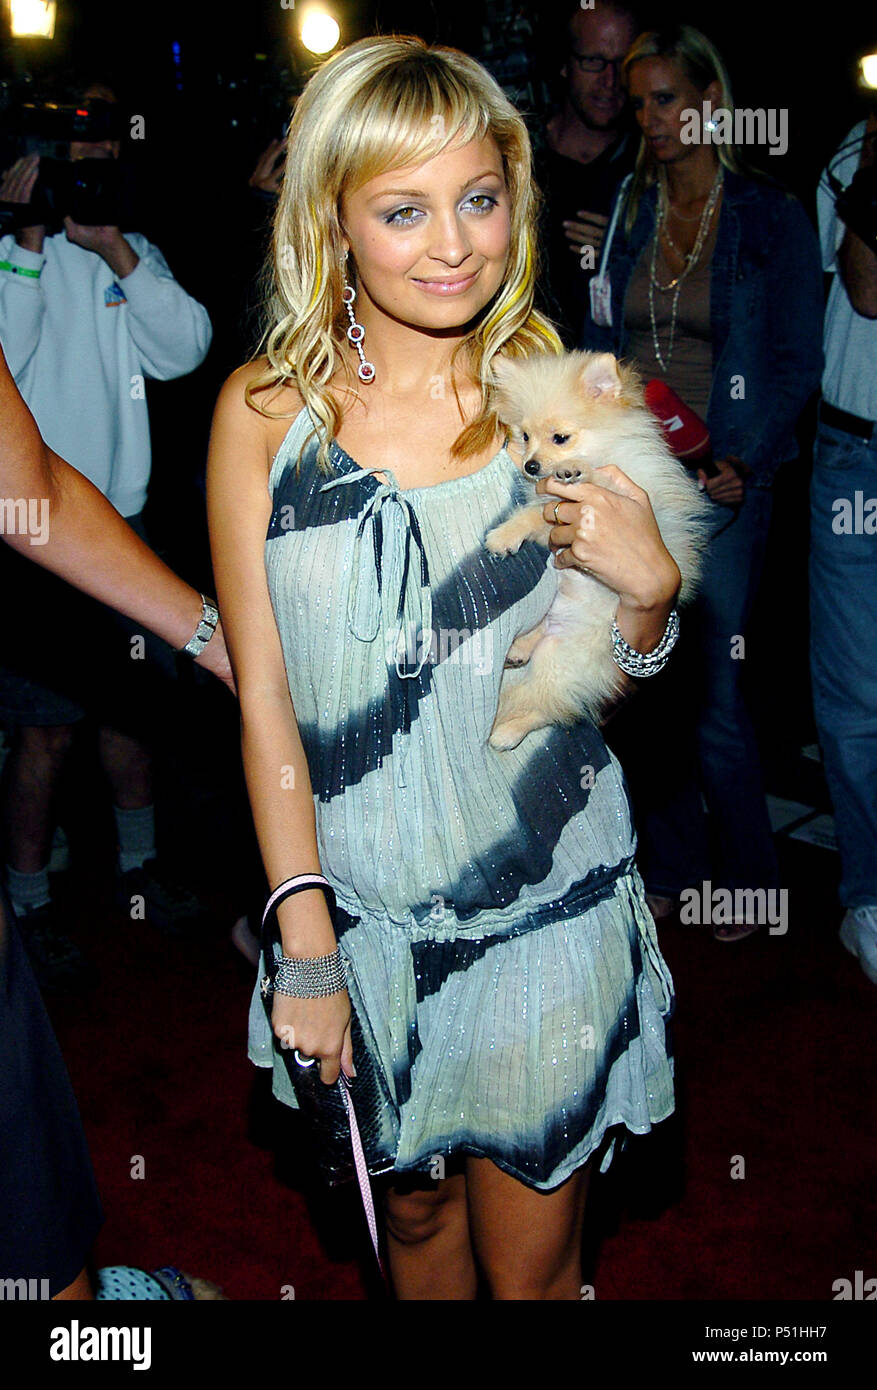 Nicole Richie at the Pelle Pelle's Celebrity Catwalk for Charity for Animal at the Hollywood Palladium in Los Angeles. August 19, 2004.RichieNicole089 Red Carpet Event, Vertical, USA, Film Industry, Celebrities,  Photography, Bestof, Arts Culture and Entertainment, Topix Celebrities fashion /  Vertical, Best of, Event in Hollywood Life - California,  Red Carpet and backstage, USA, Film Industry, Celebrities,  movie celebrities, TV celebrities, Music celebrities, Photography, Bestof, Arts Culture and Entertainment,  Topix, vertical, one person,, from the years , 2003 to 2005, inquiry tsuni@Gamm Stock Photo